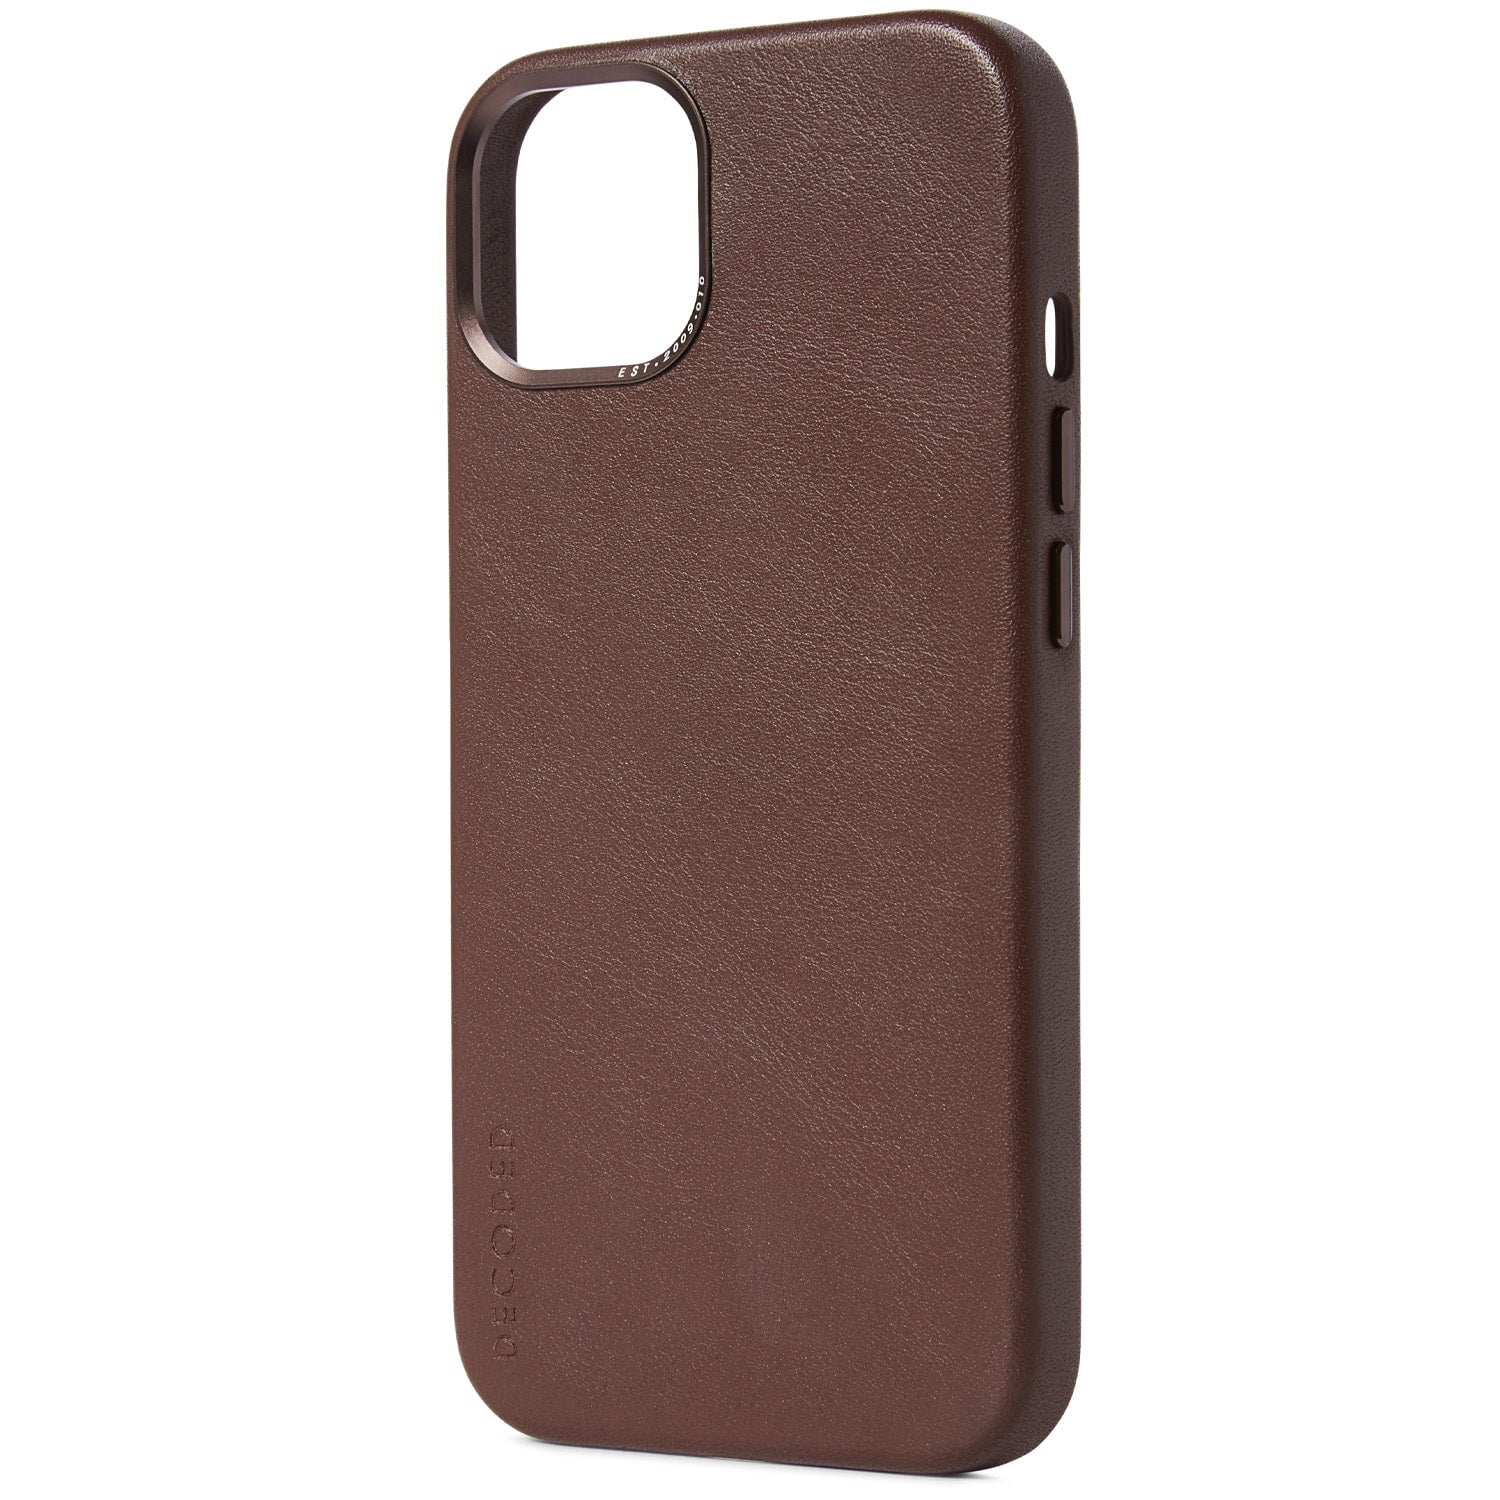 Chocolate leather case